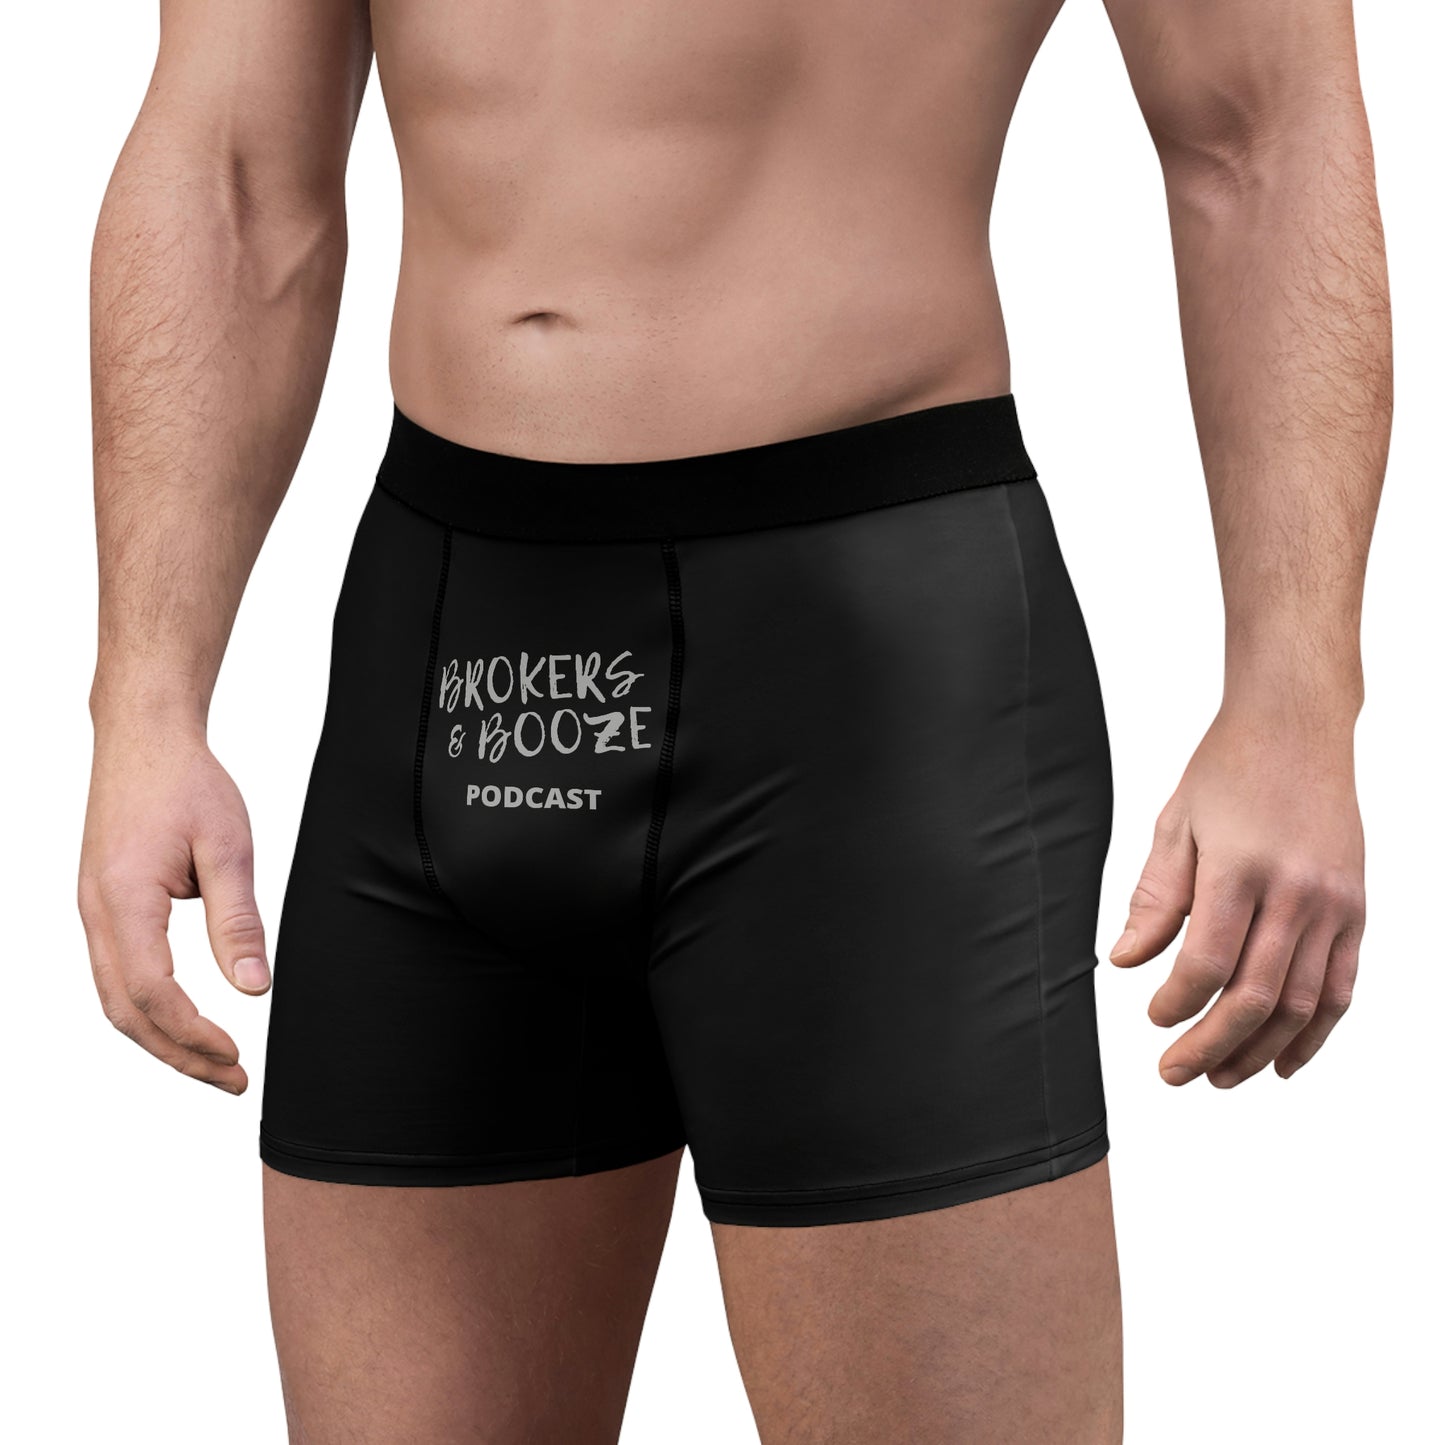 Brokers and Booze Podcast Men's Boxer Briefs